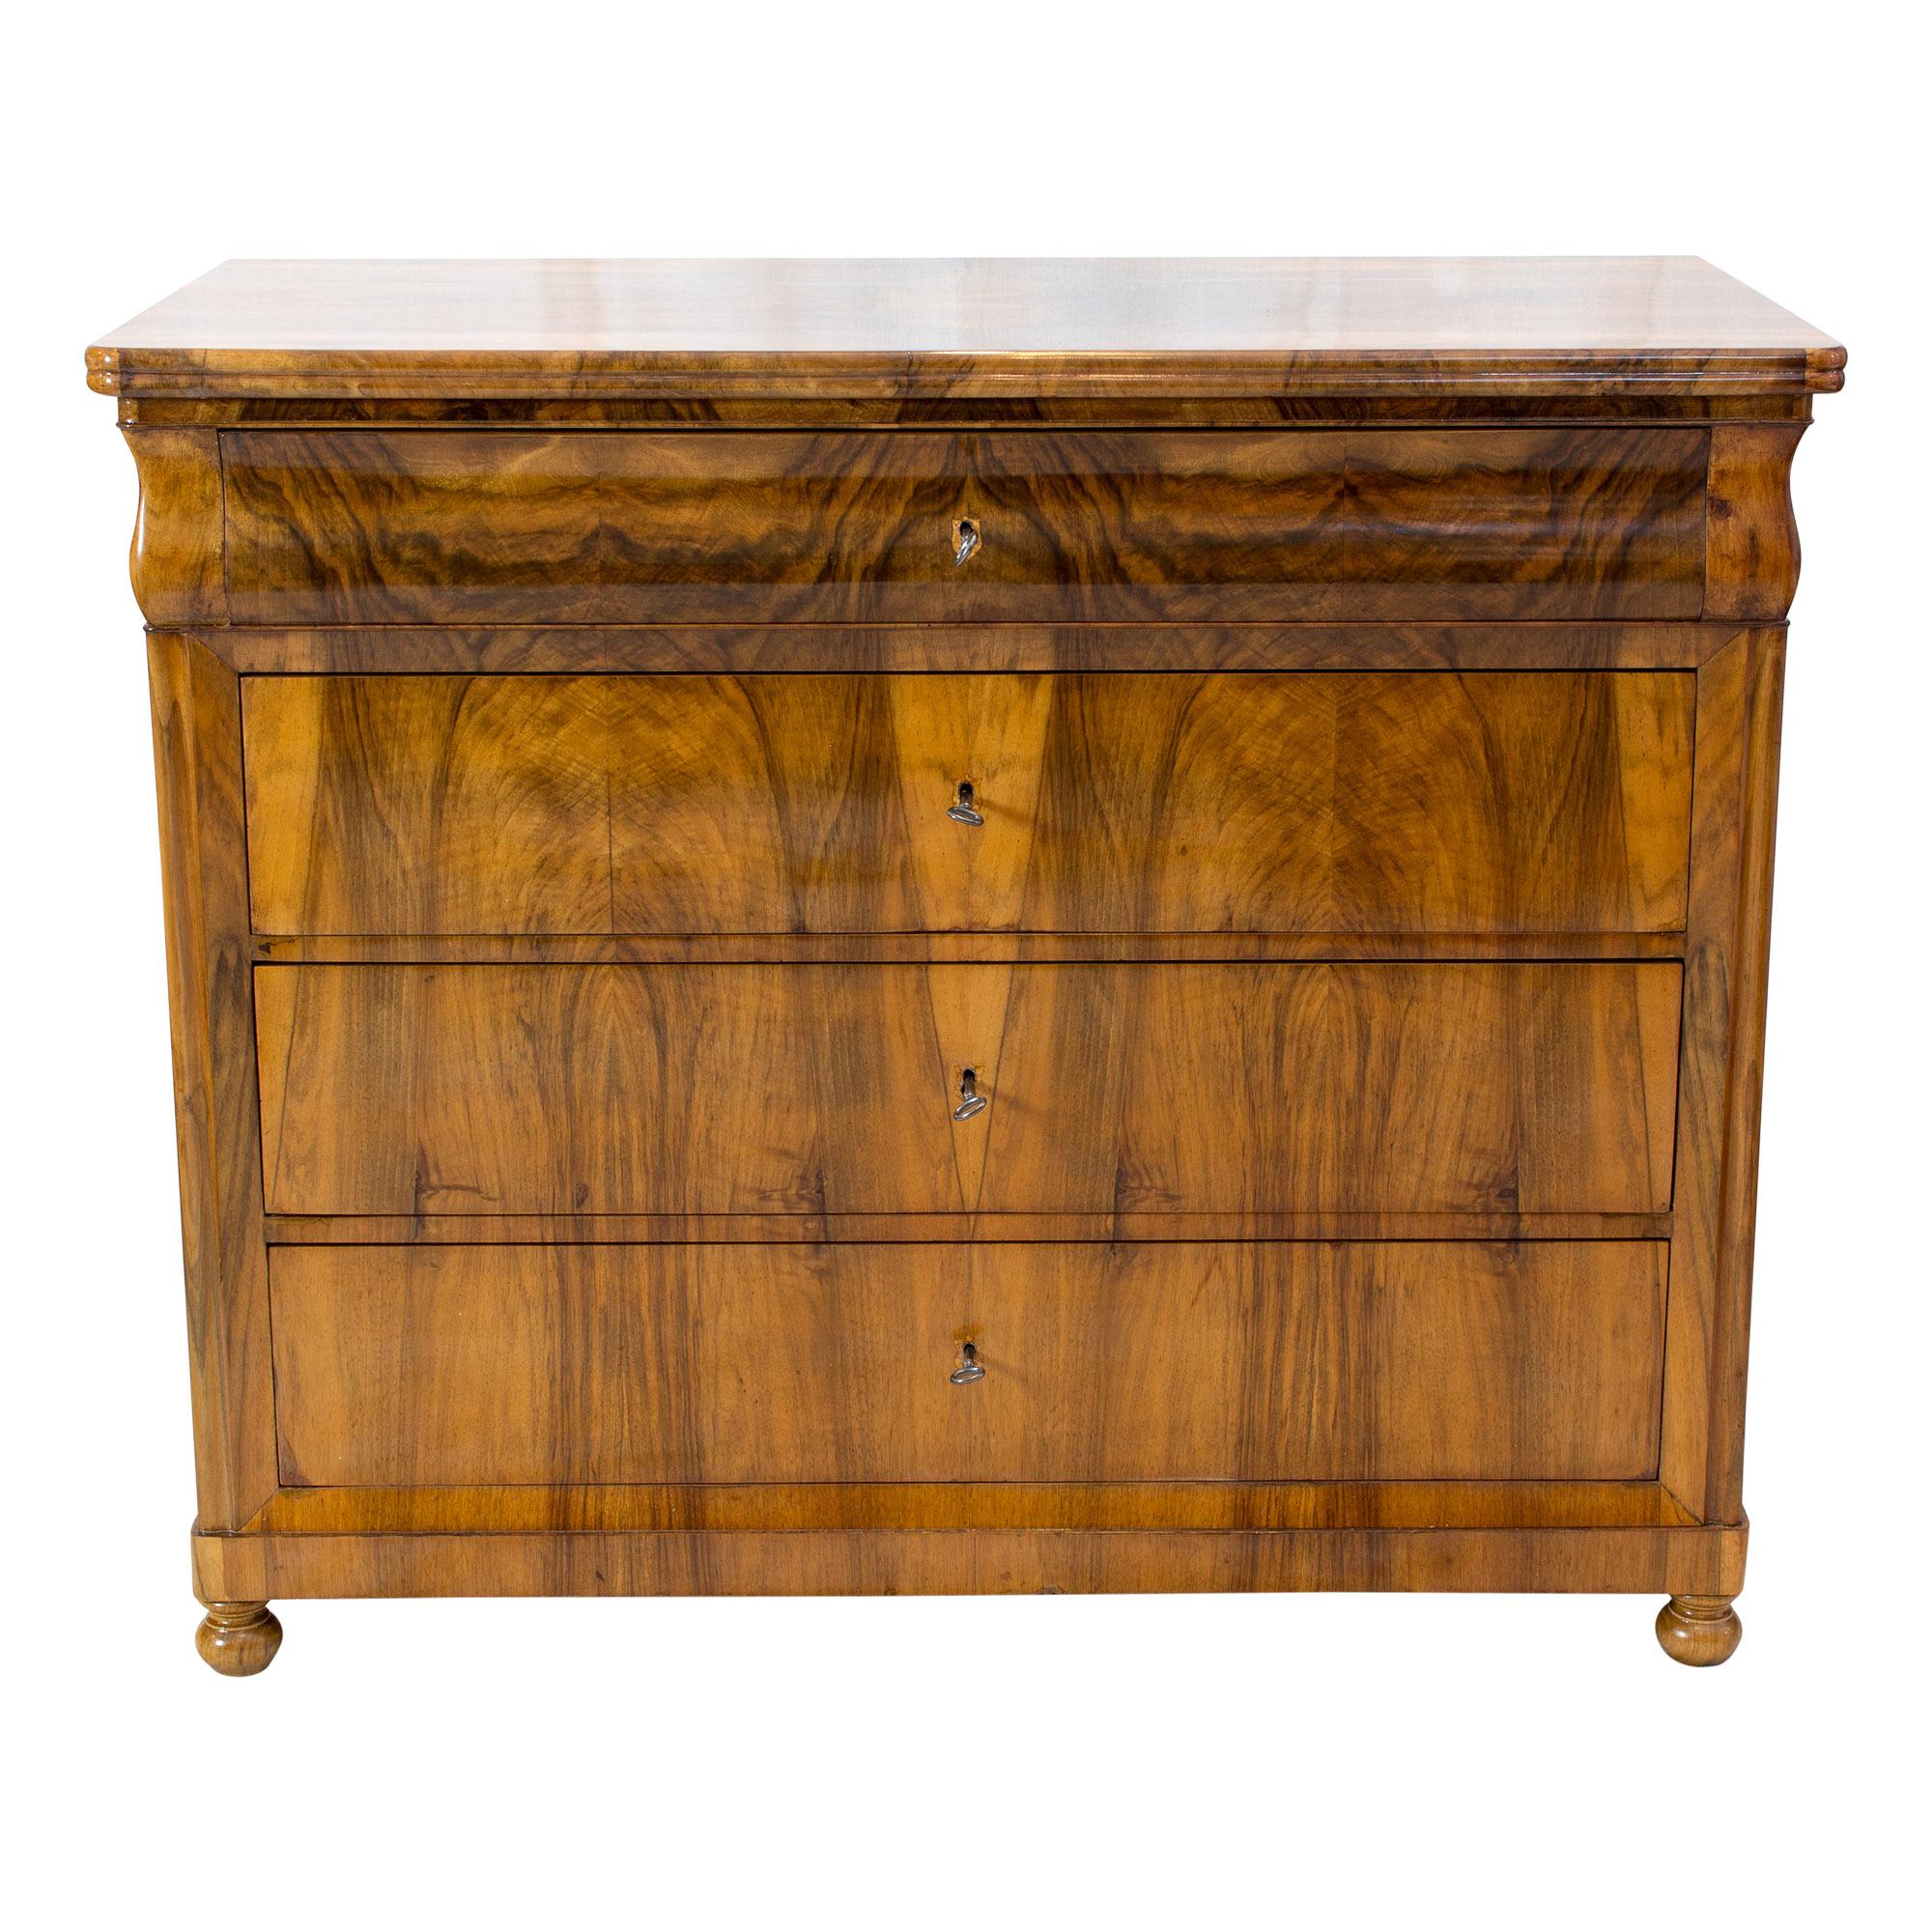 The chest of drawers dates from the Biedermeier period. The chest of drawers has a beautiful walnut veneer picture, which covers a spruce wood body. In very good restored hand polished condition.